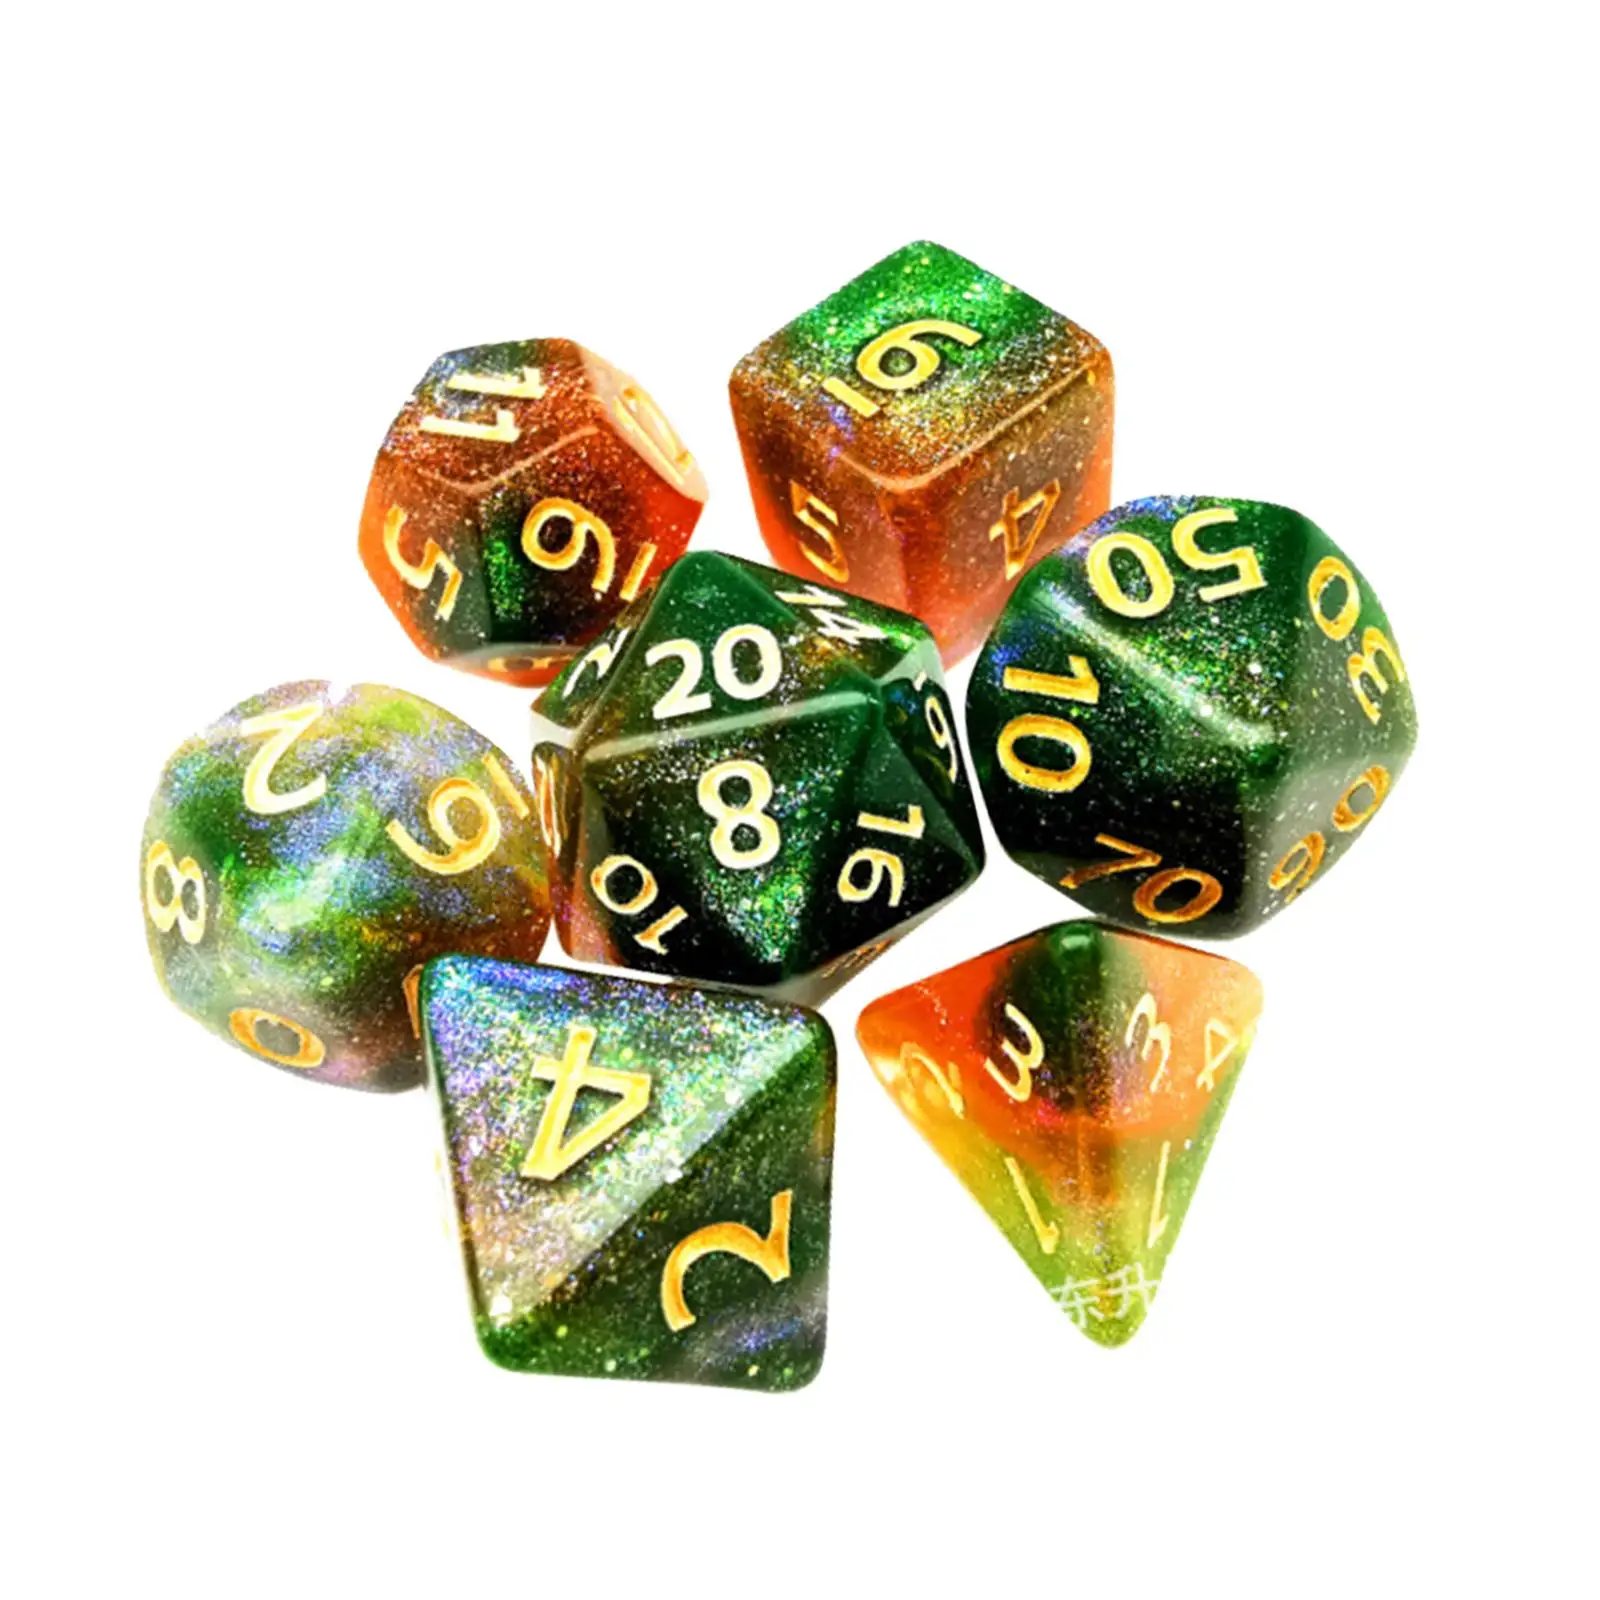 7 Die Polyhedral Dices Set D4-D20 Party Toys for MTG RPG Role Playing Table Games Math Teaching